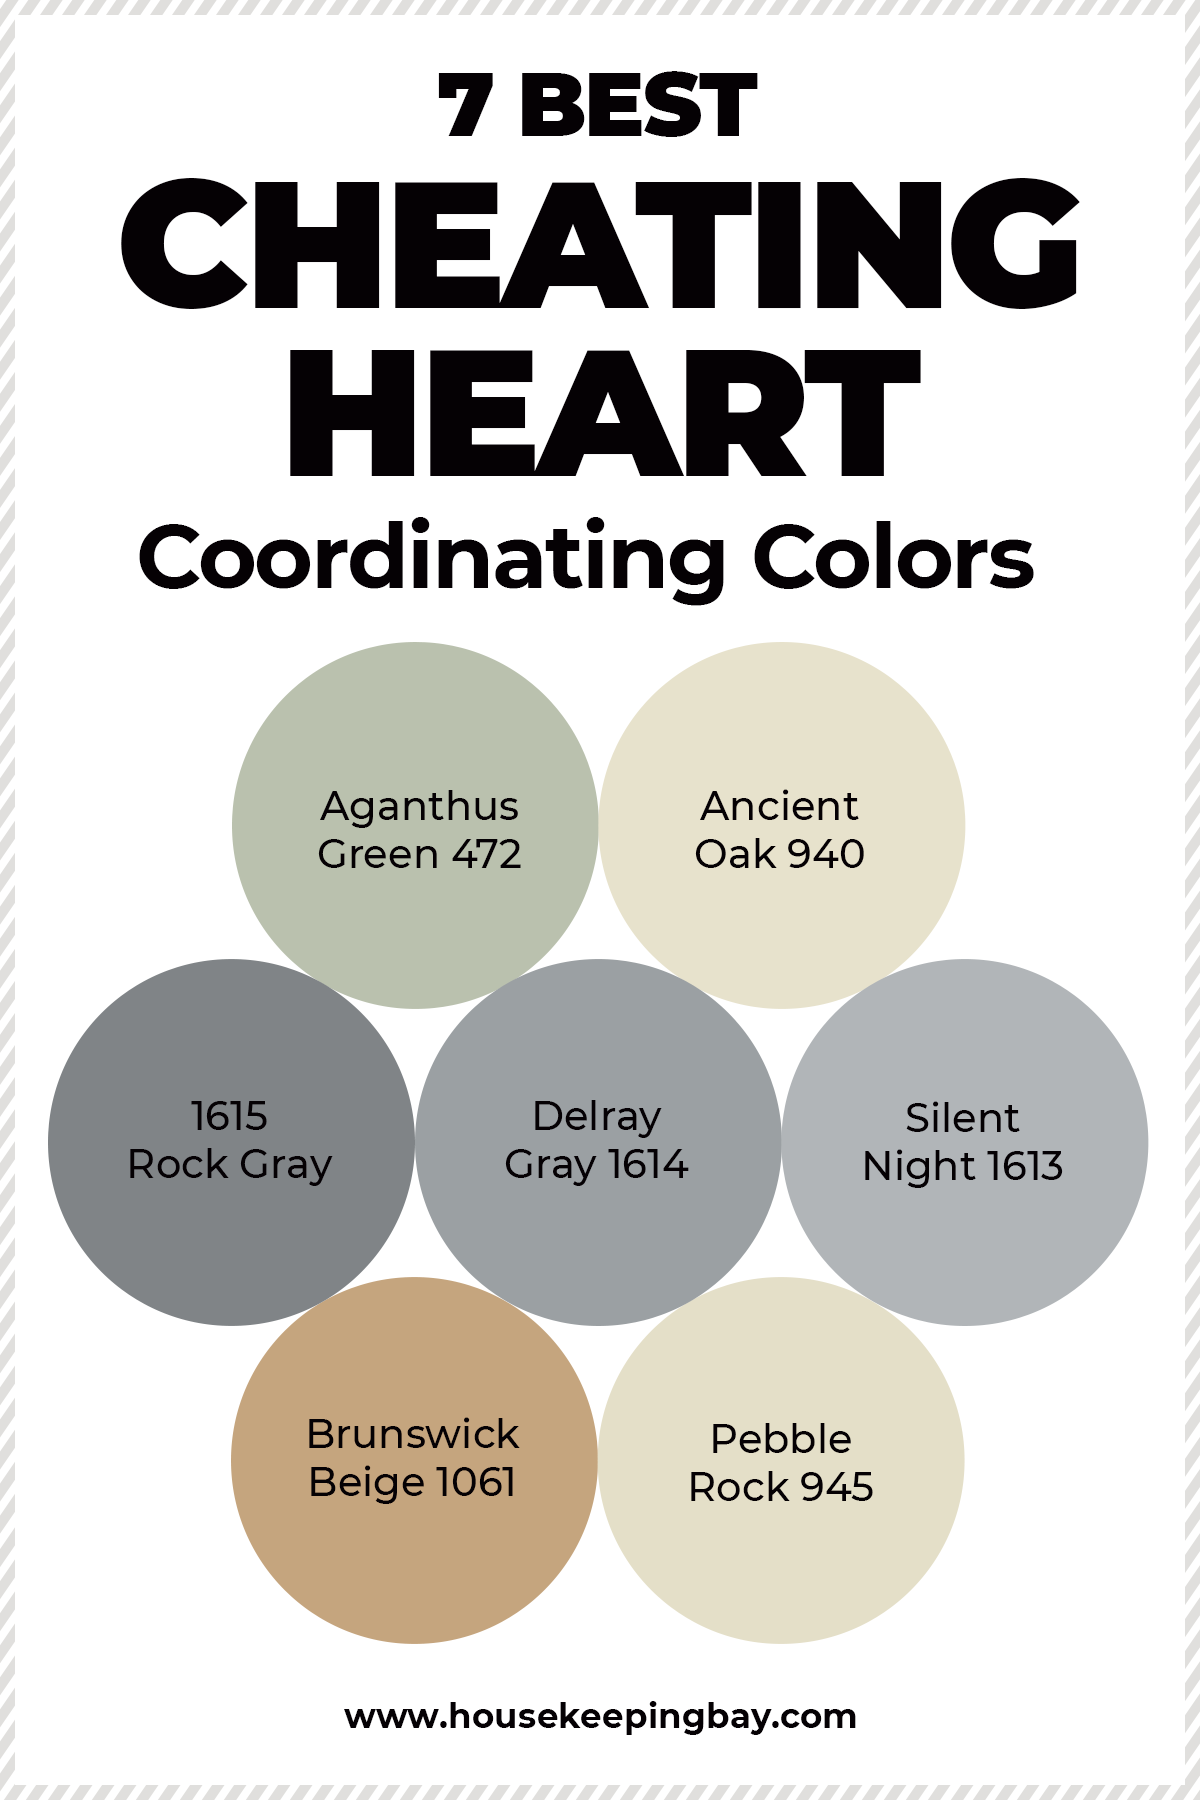 7 BEST Cheating Heart Coordinating Colors